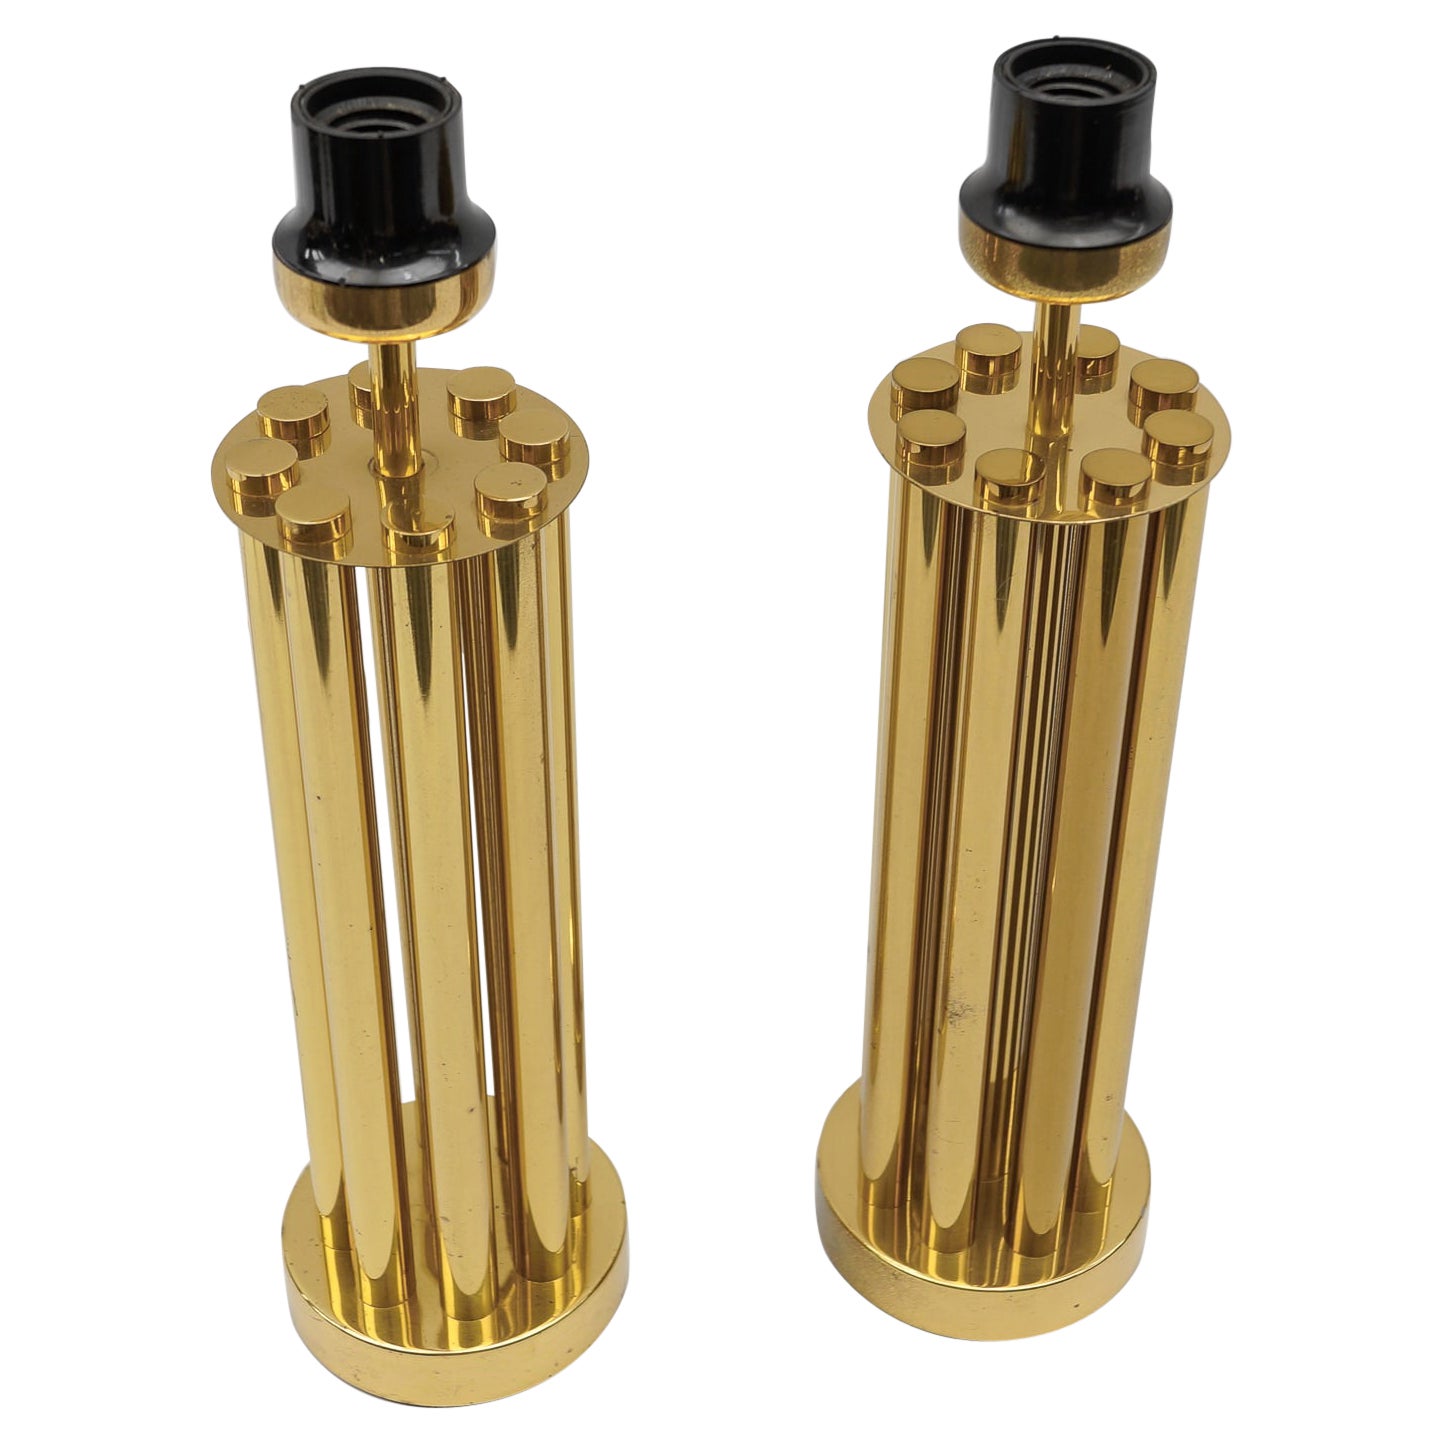 Pair of Mid Century Modern Brass Table Lamp Bases, 1960s